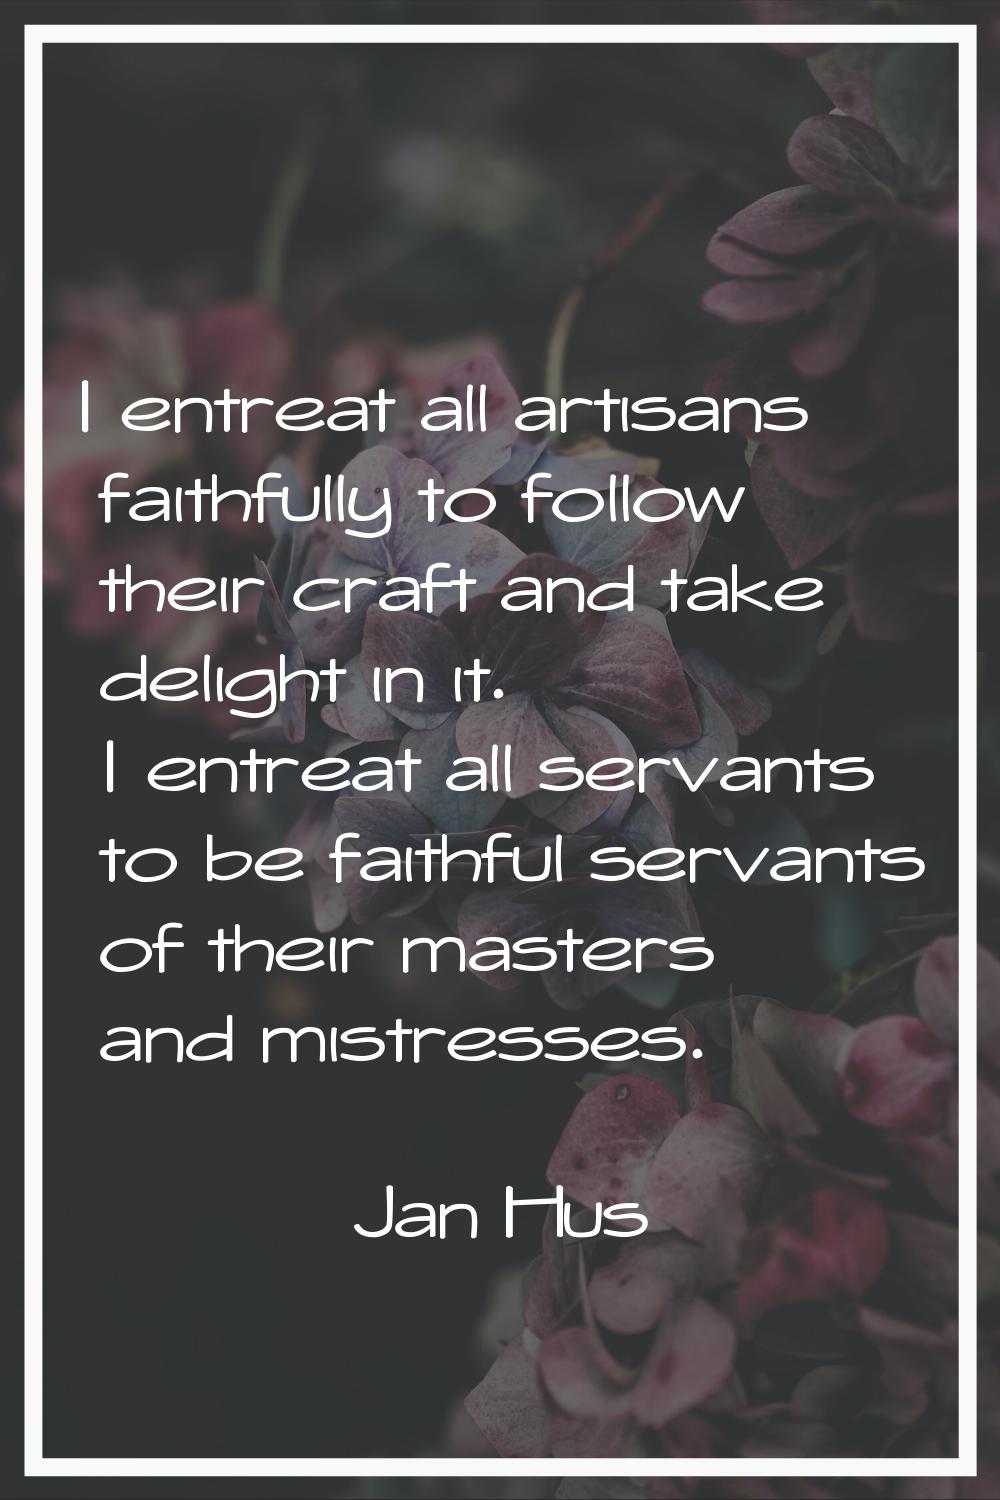 I entreat all artisans faithfully to follow their craft and take delight in it. I entreat all serva